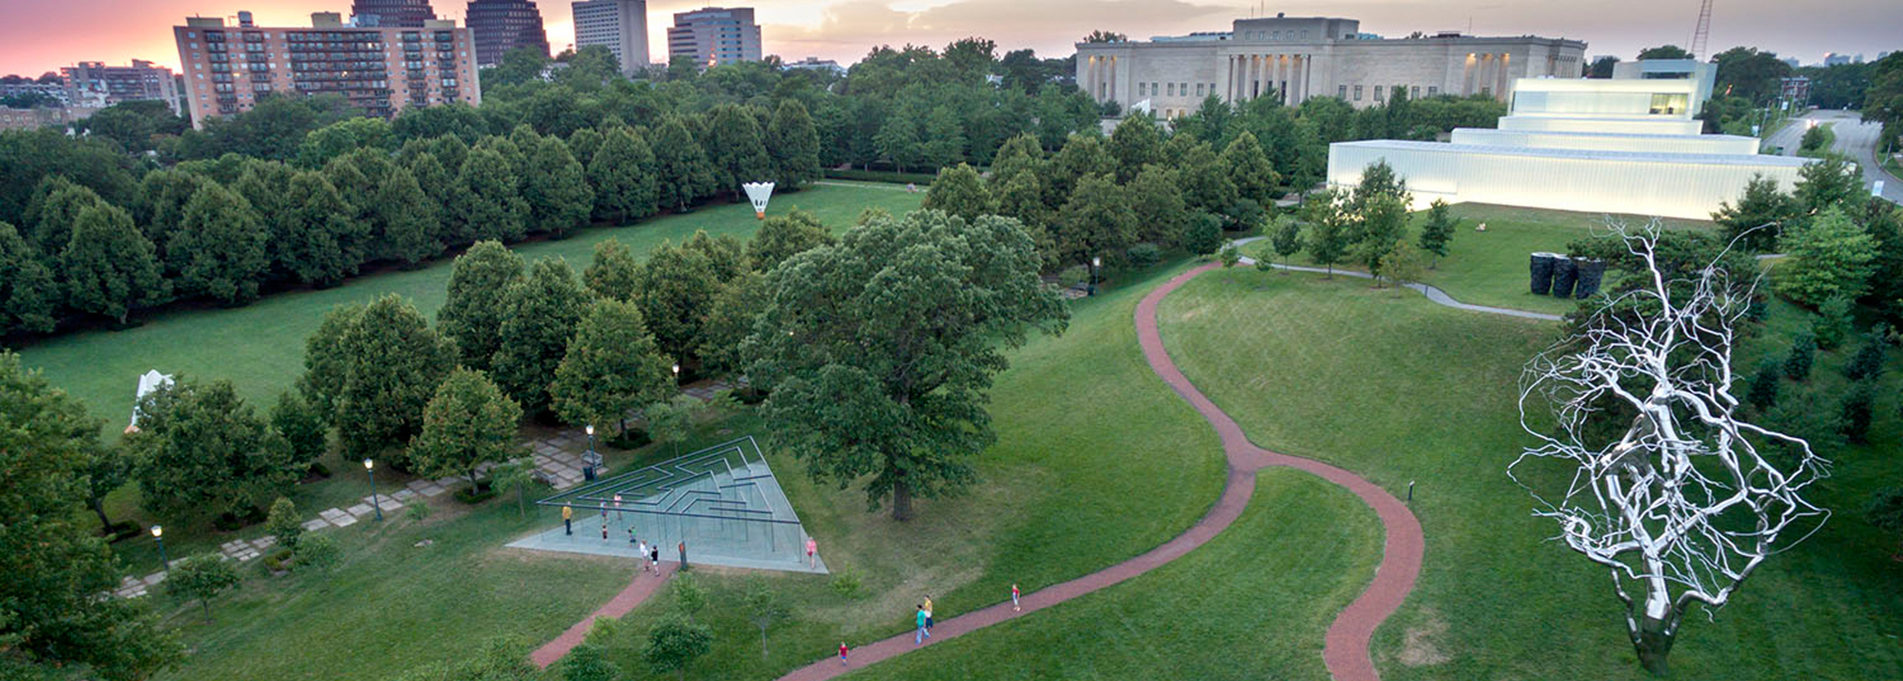 Arial view of Sculpture Park